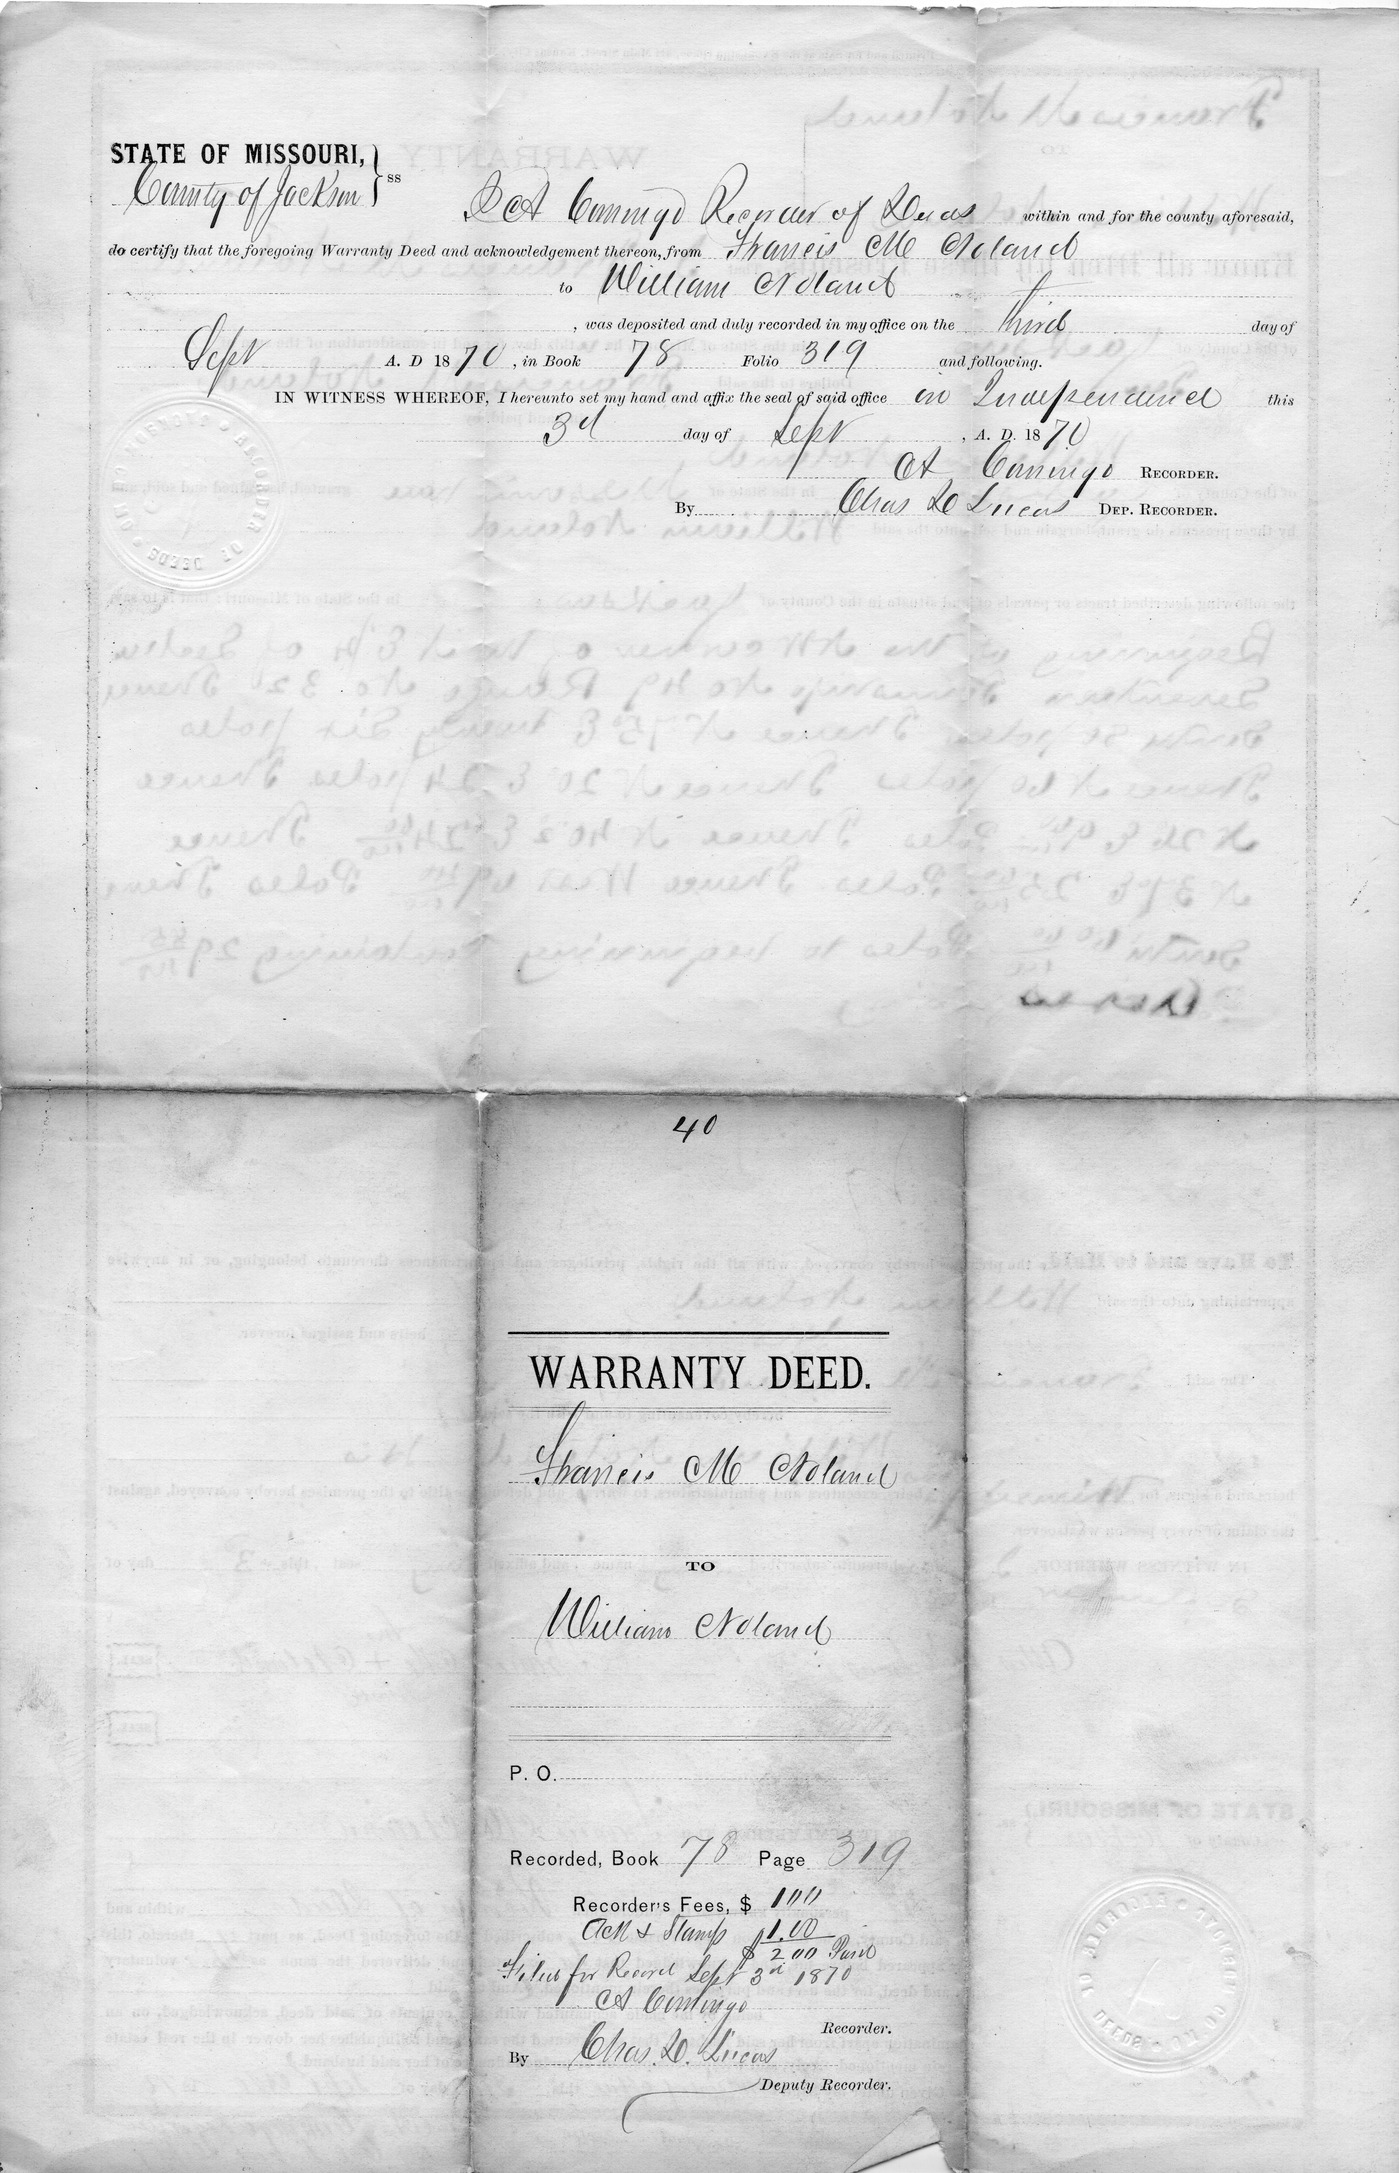 Warranty Deed from Francis M. Noland to William Noland